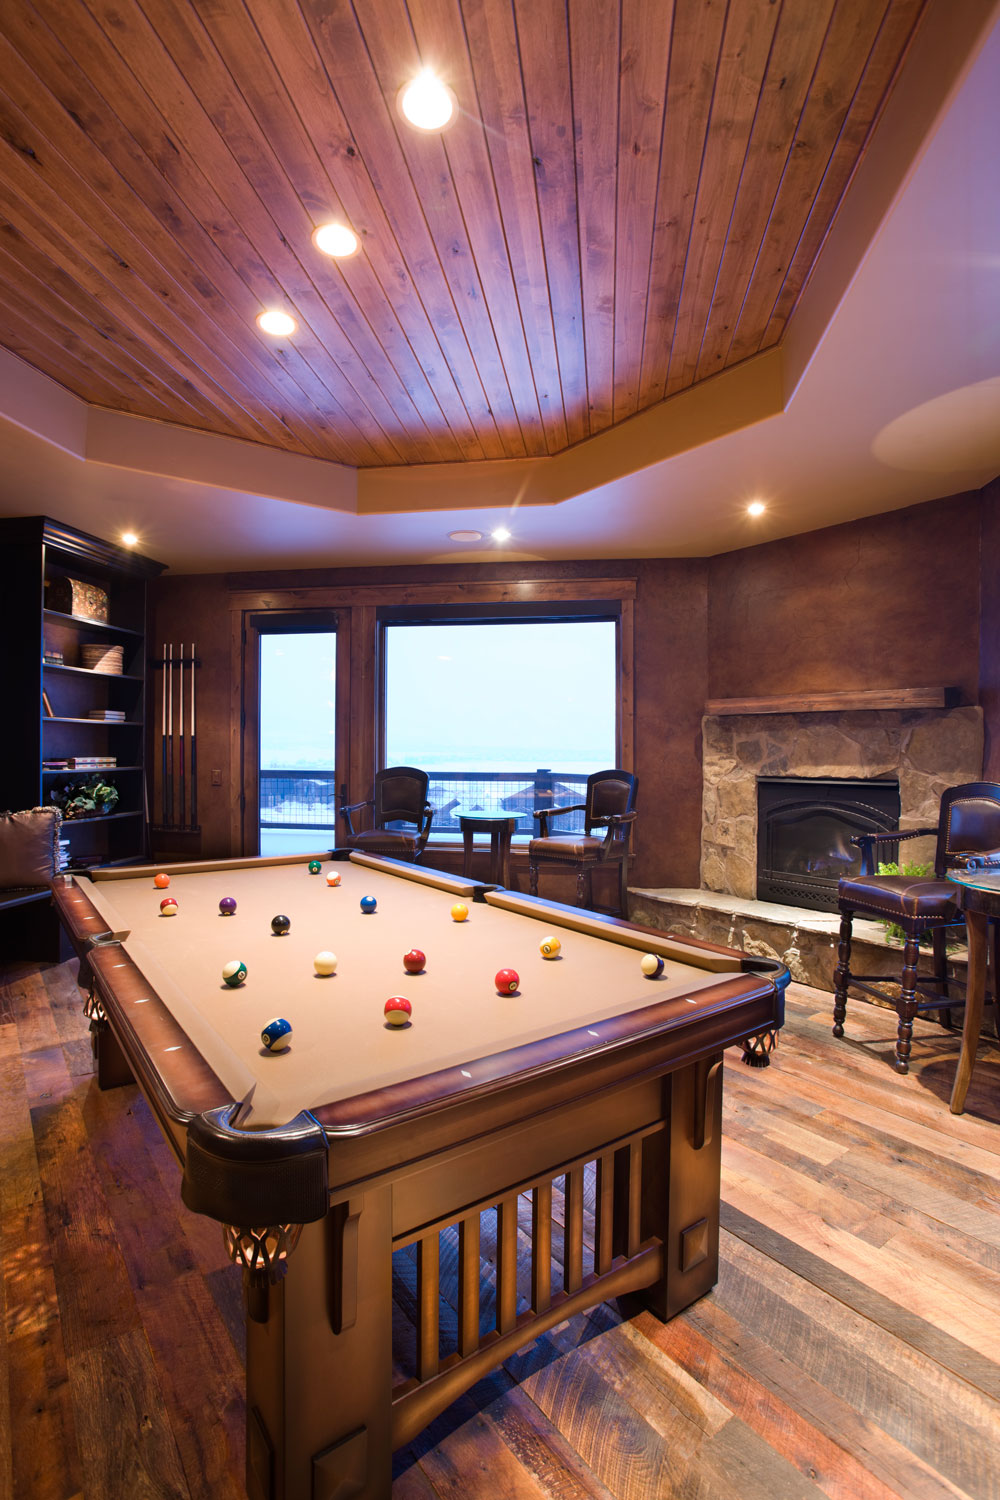 An expensive rustic entertainment room made from wooden paneling, hardwood flooring and an expensive wooden billiard table